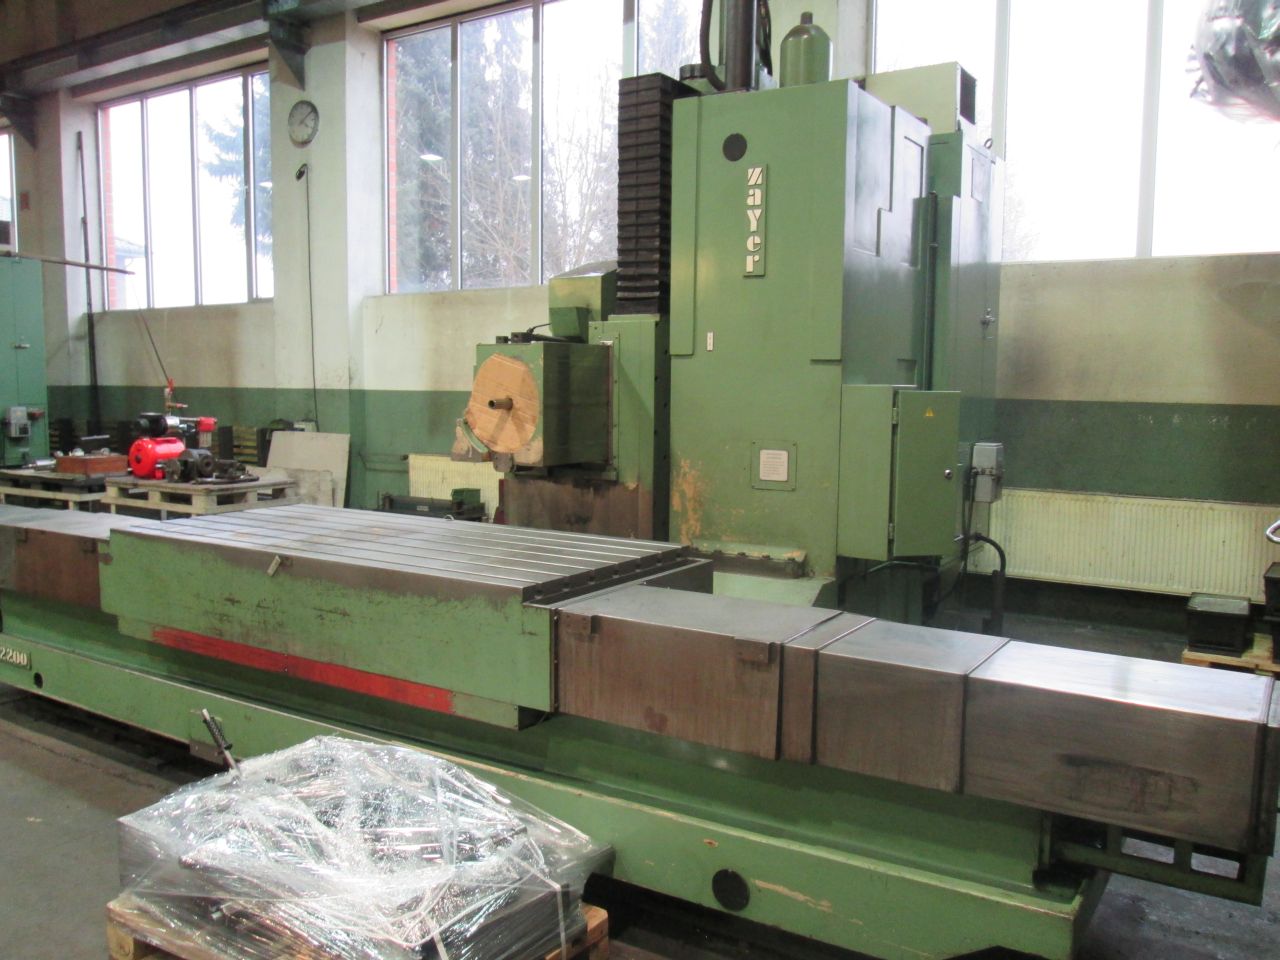 Bed Type Milling/ZAYER KF2200 (12.498L)